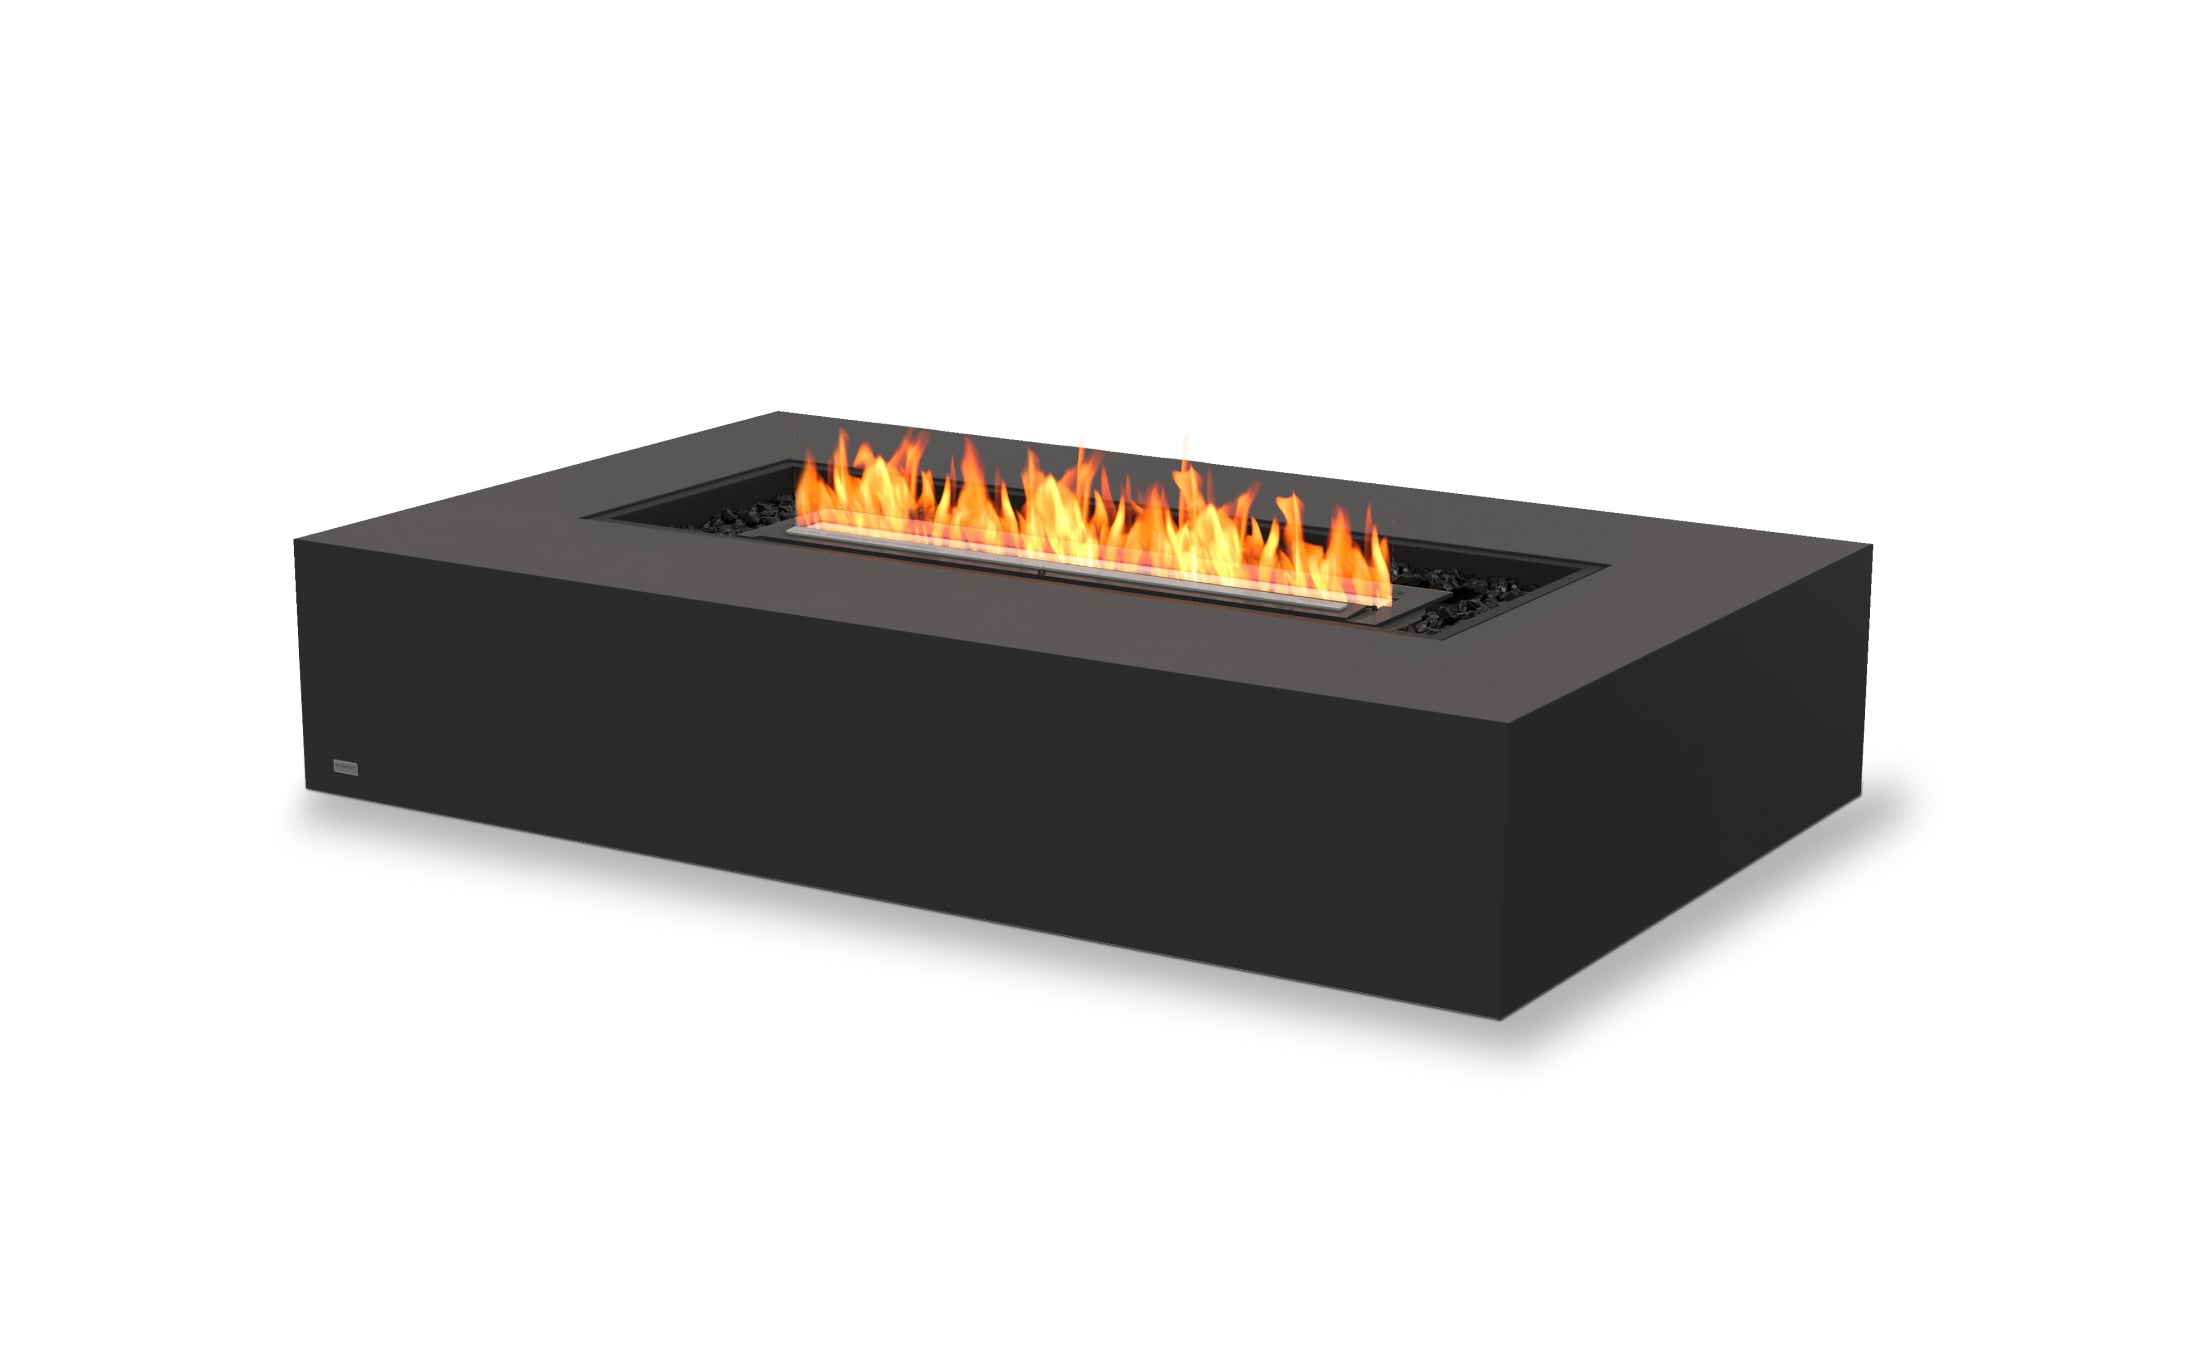 Gas Fire Pit Coffee Table